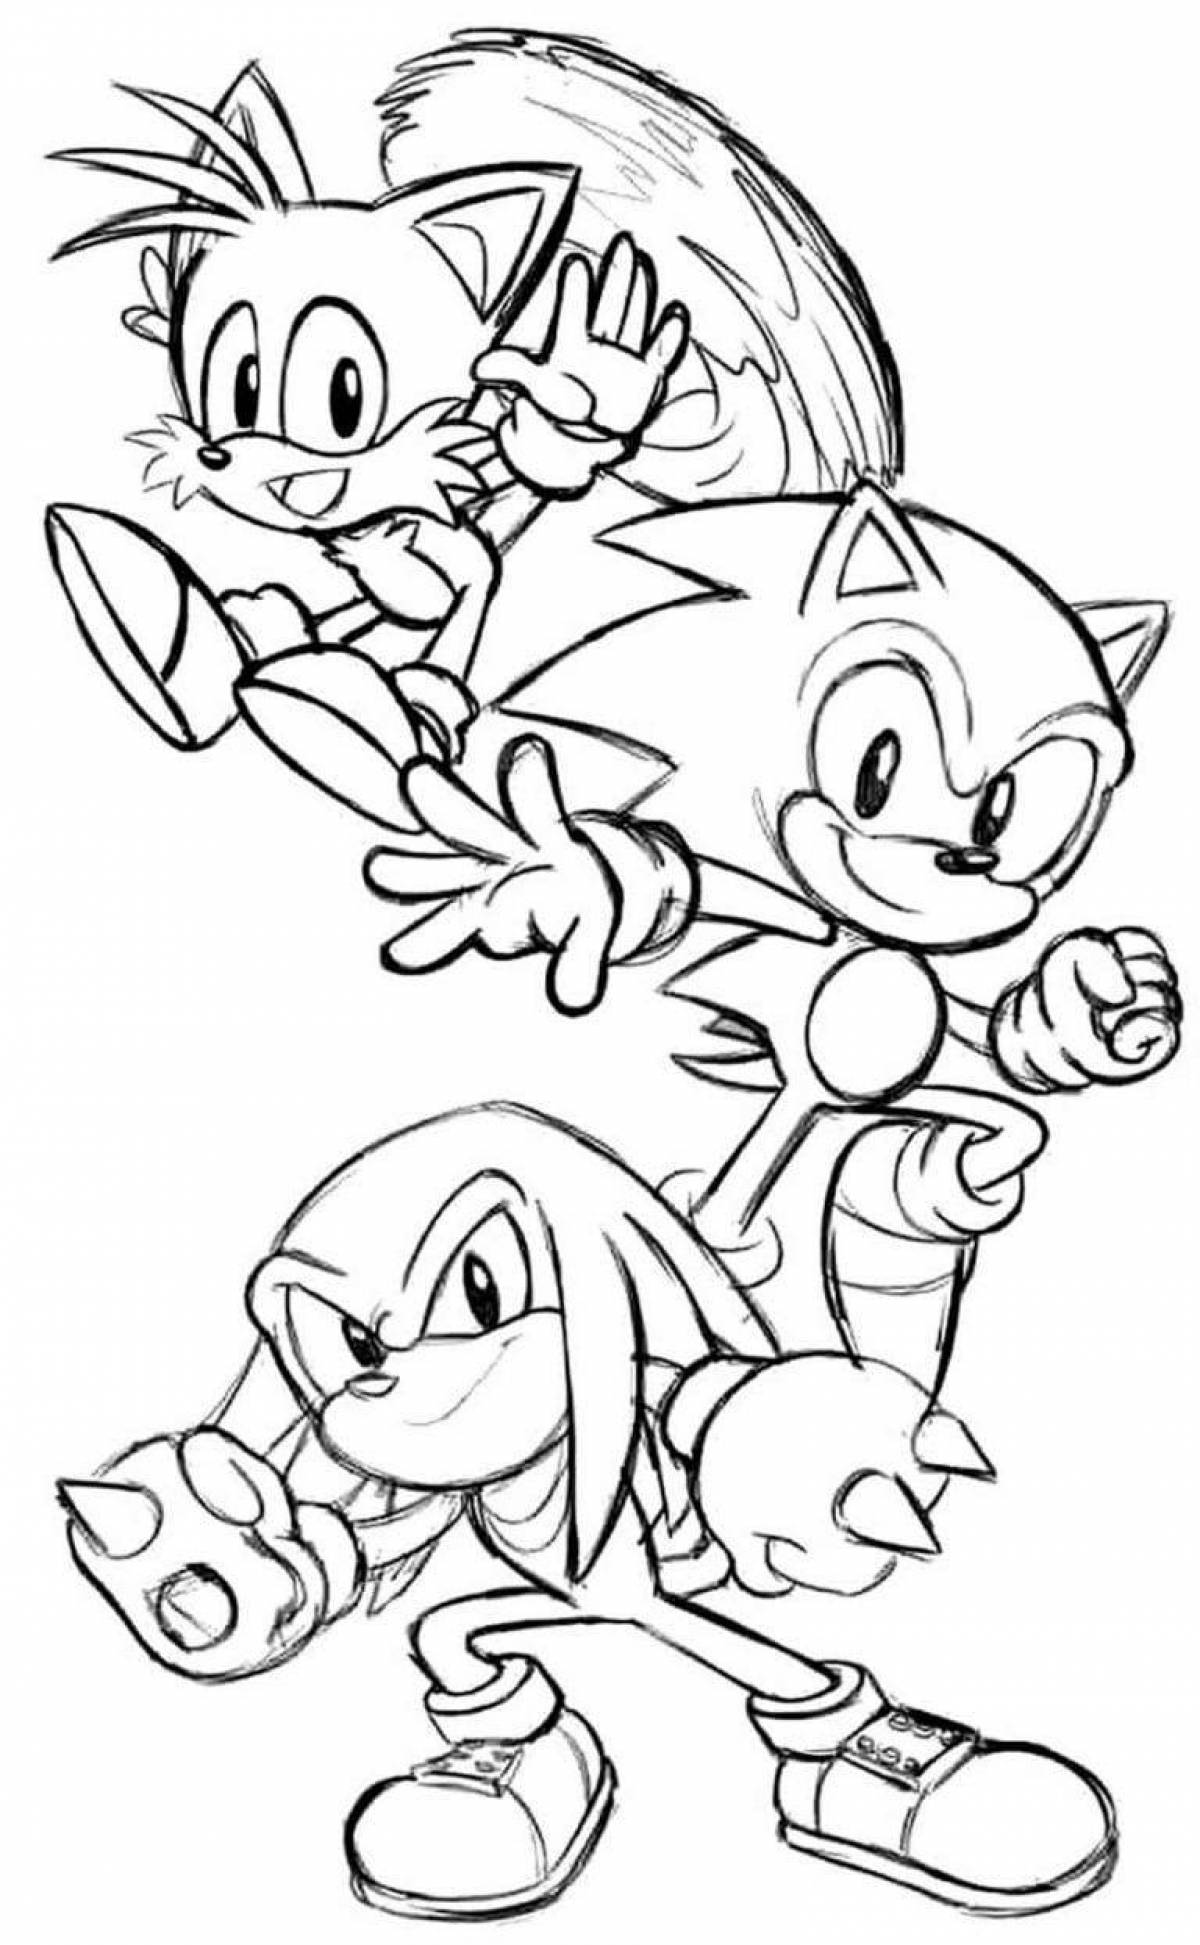 Sonic and friends #4